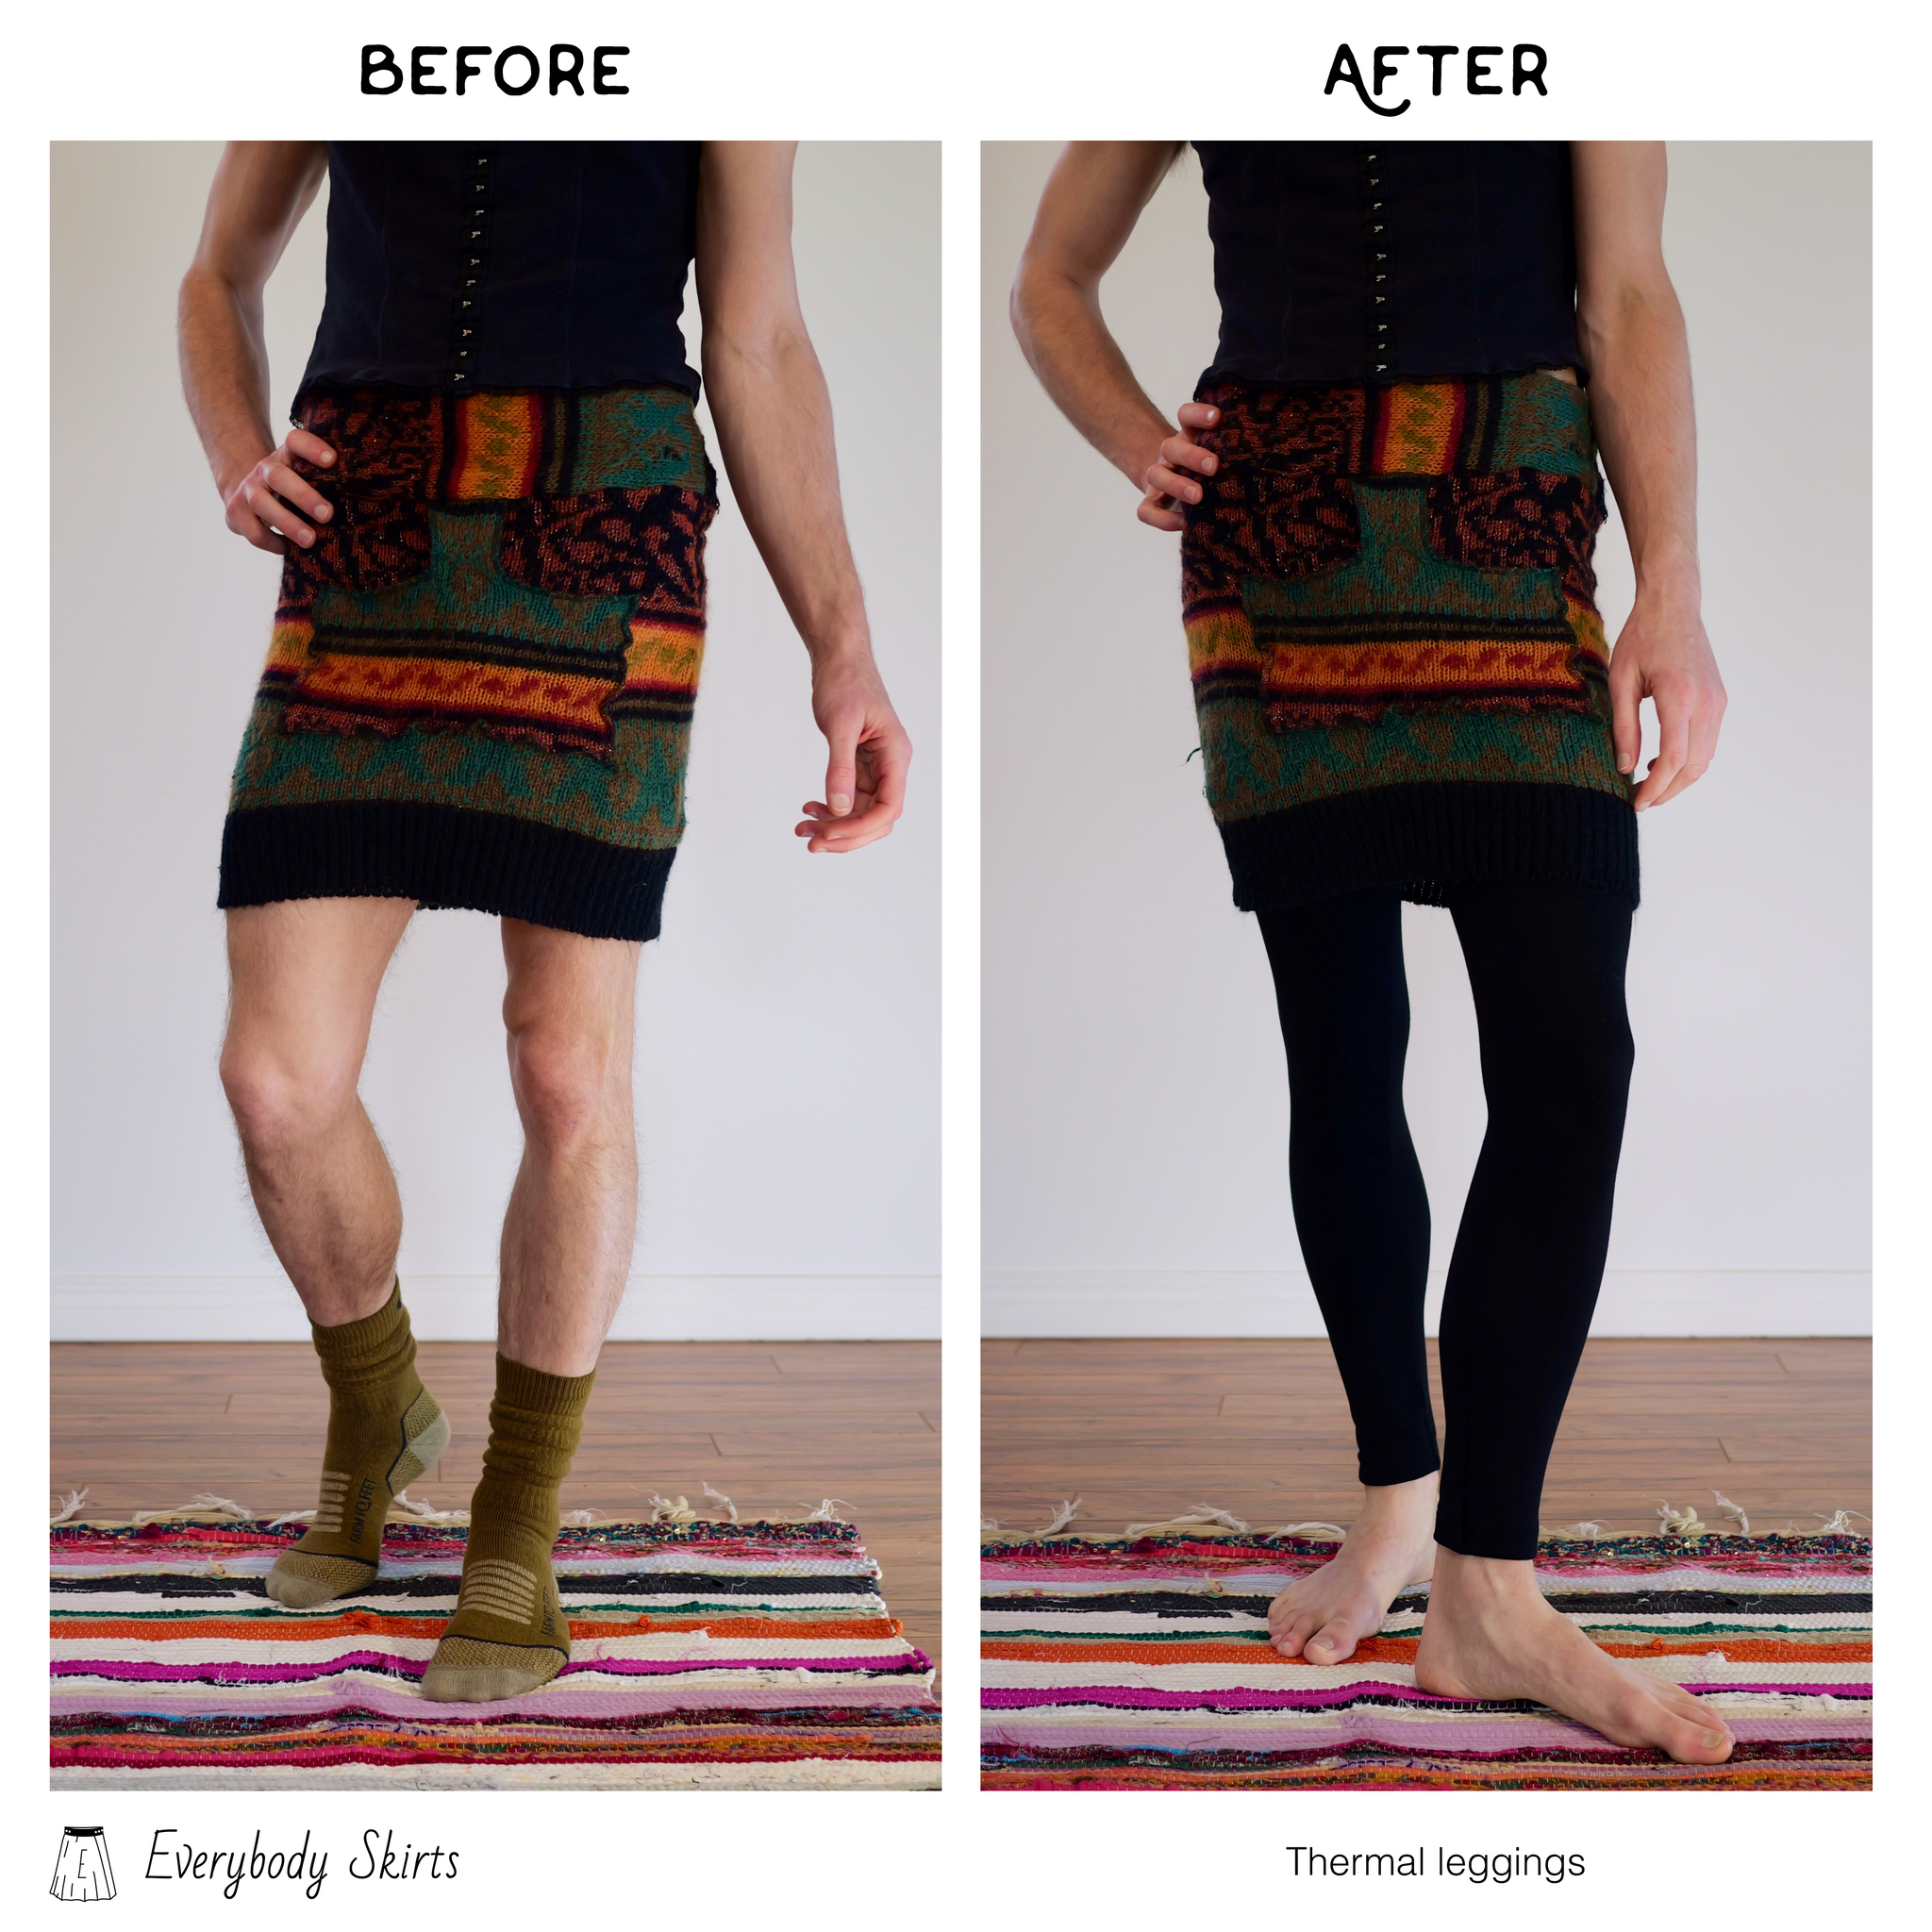 Before and after pictures of a male bodied individual with orange, green, and black wool yarn skirt and black armless shirt. Bare legs with socks in left shot, thermal black leggings in right shot.